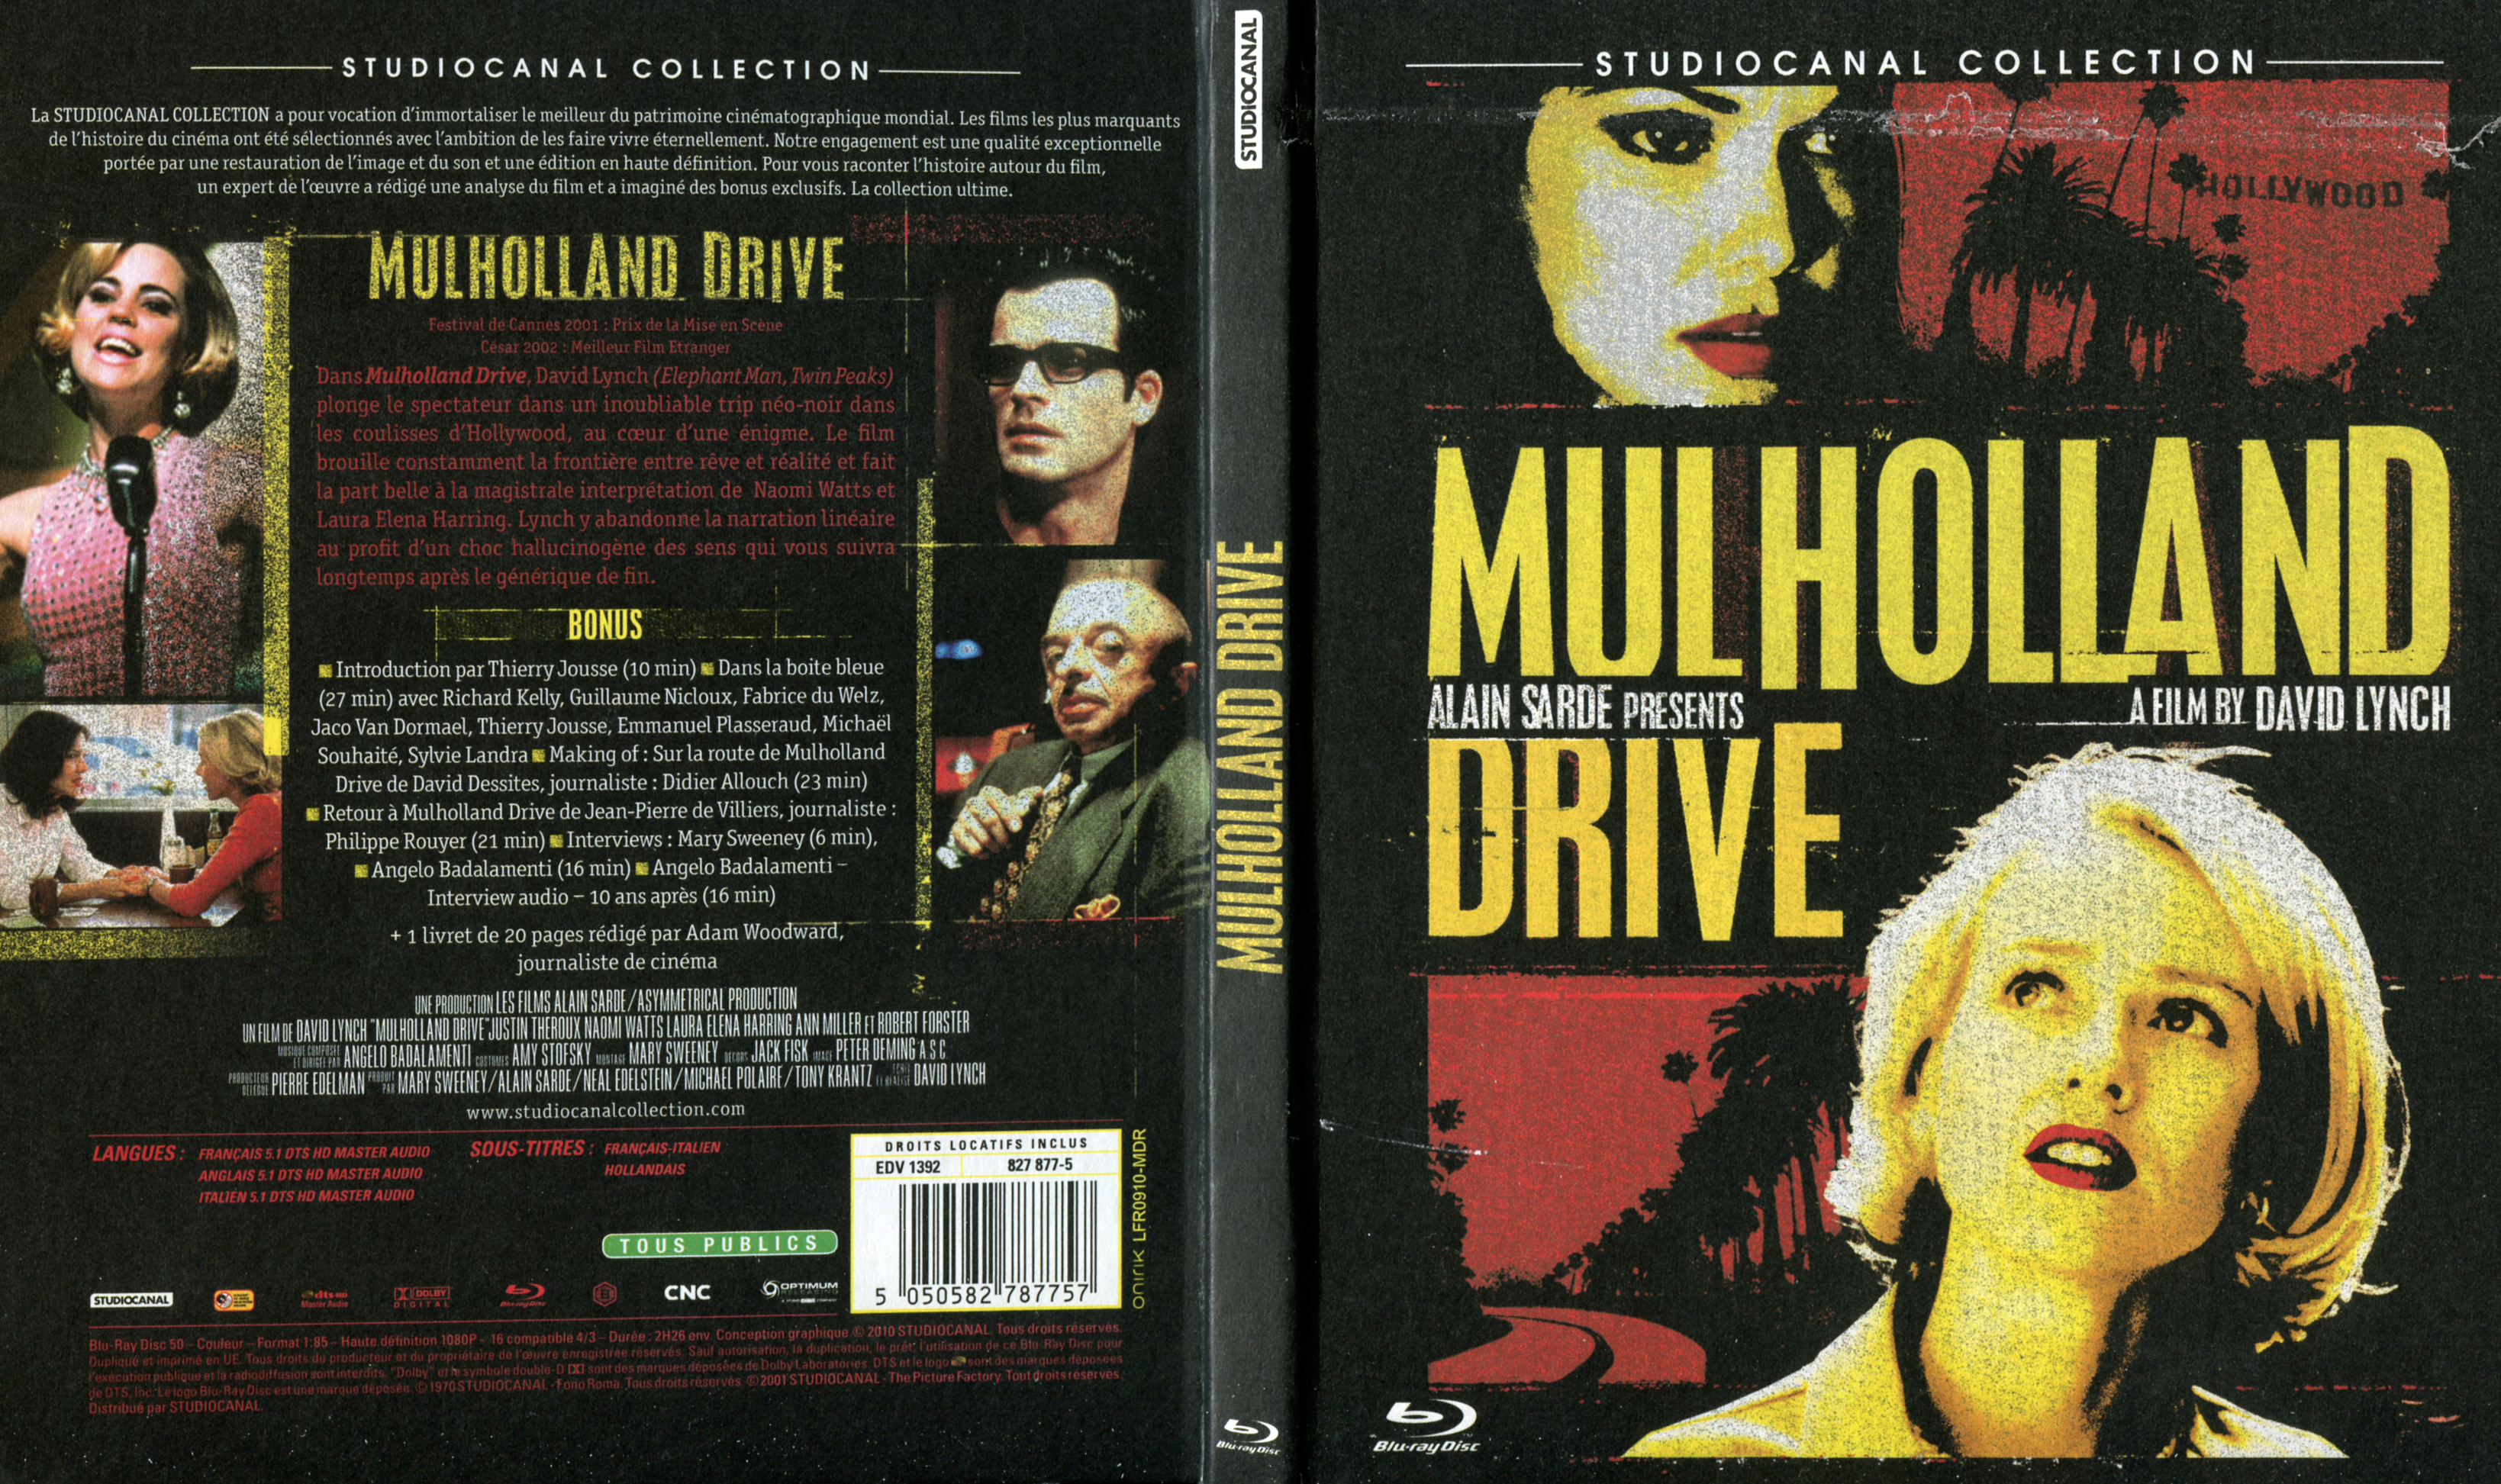 Jaquette DVD Mulholland drive (BLU-RAY)